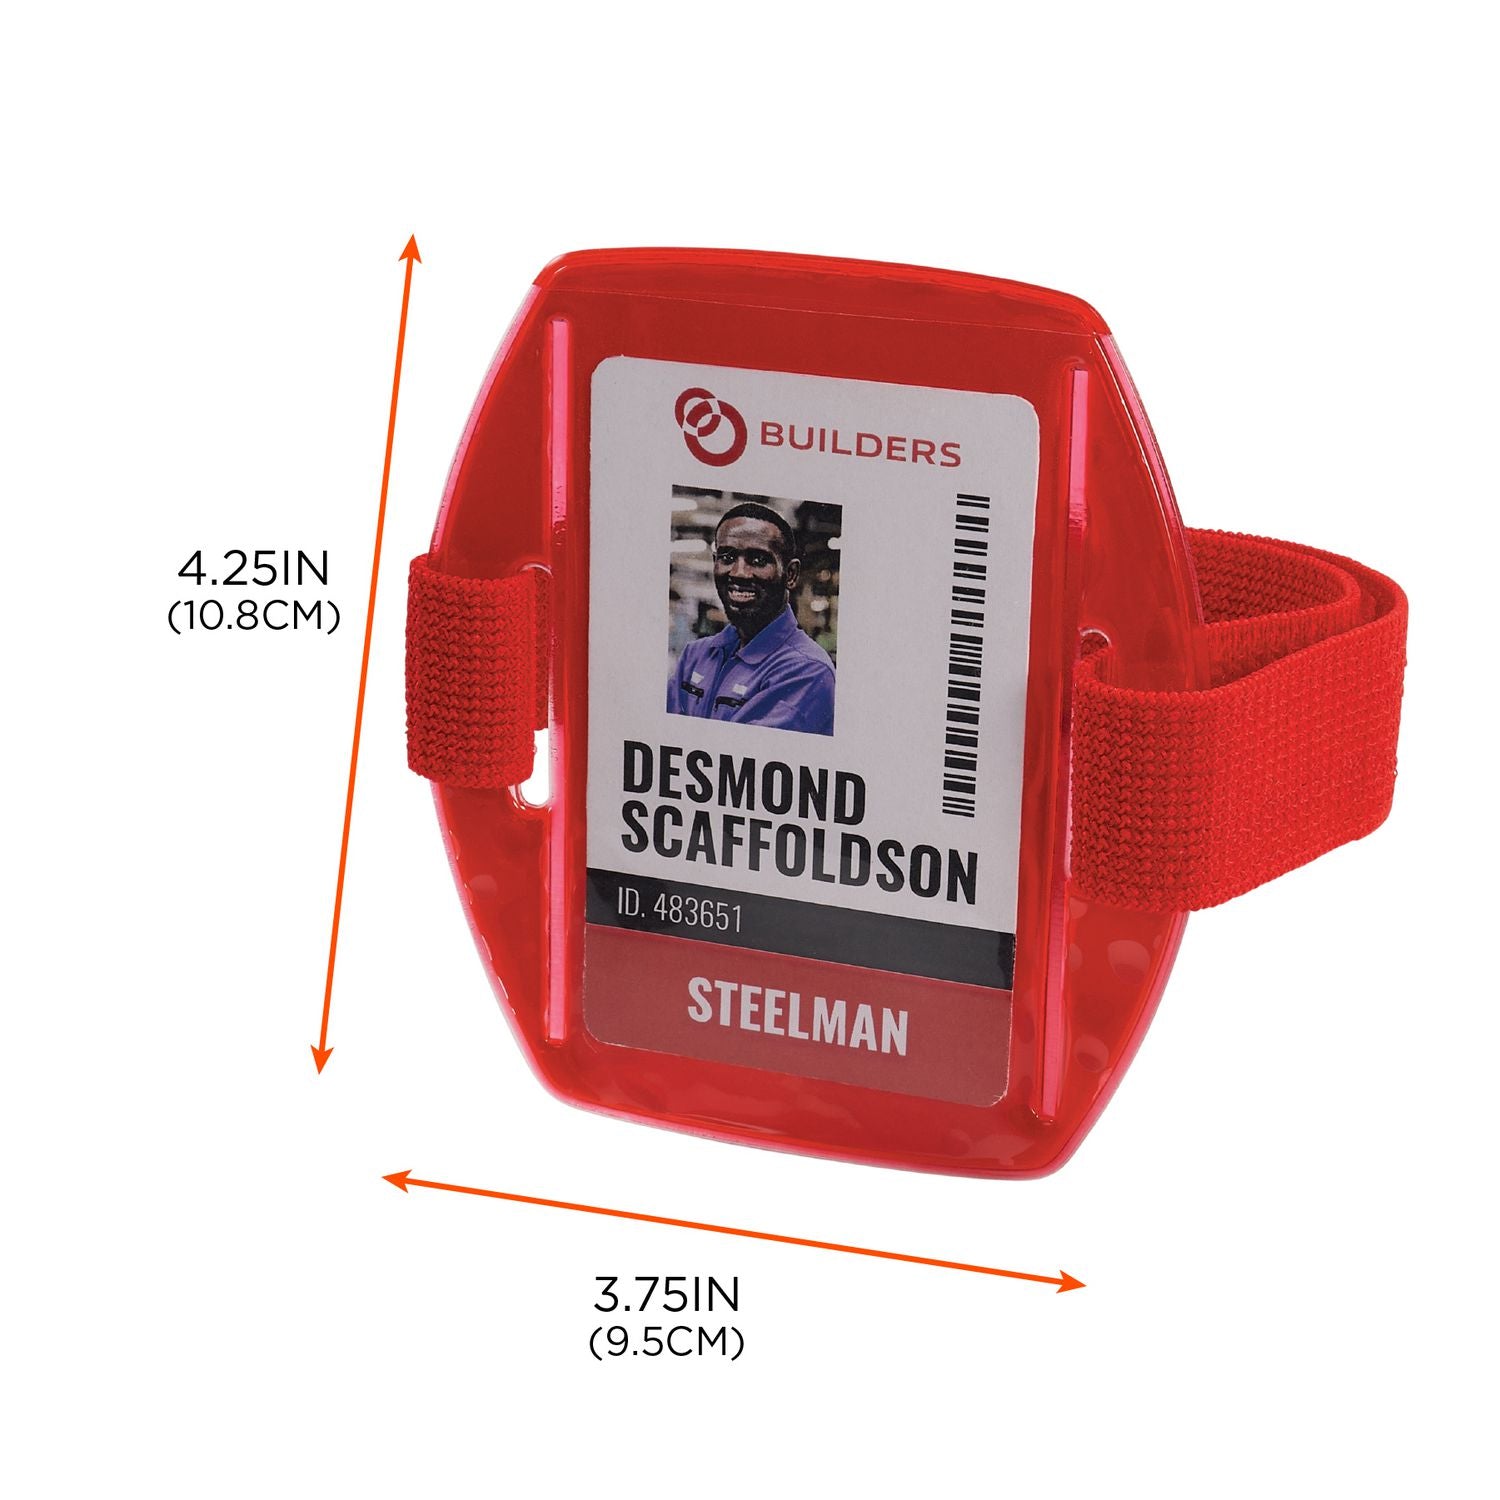 squids-3386-arm-band-id-badge-holder-vertical-red-375-x-425-holder-25-x-4-insert-ships-in-1-3-business-days_ego19955 - 7